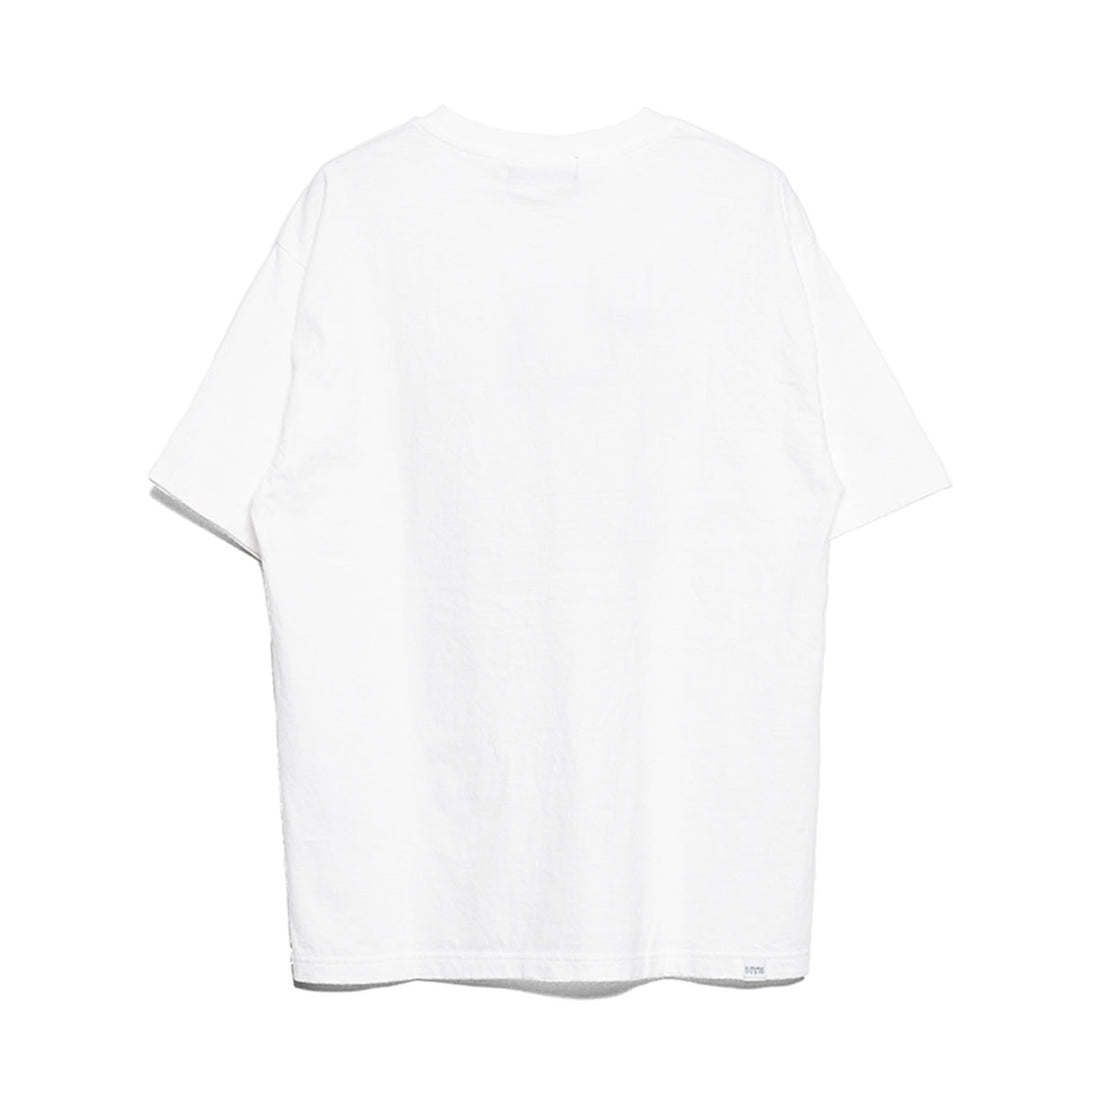 [HYSTERIC GLAMOUR]HYSTERIC FLAVOR Tシャツ/WHITE(02231CT11)